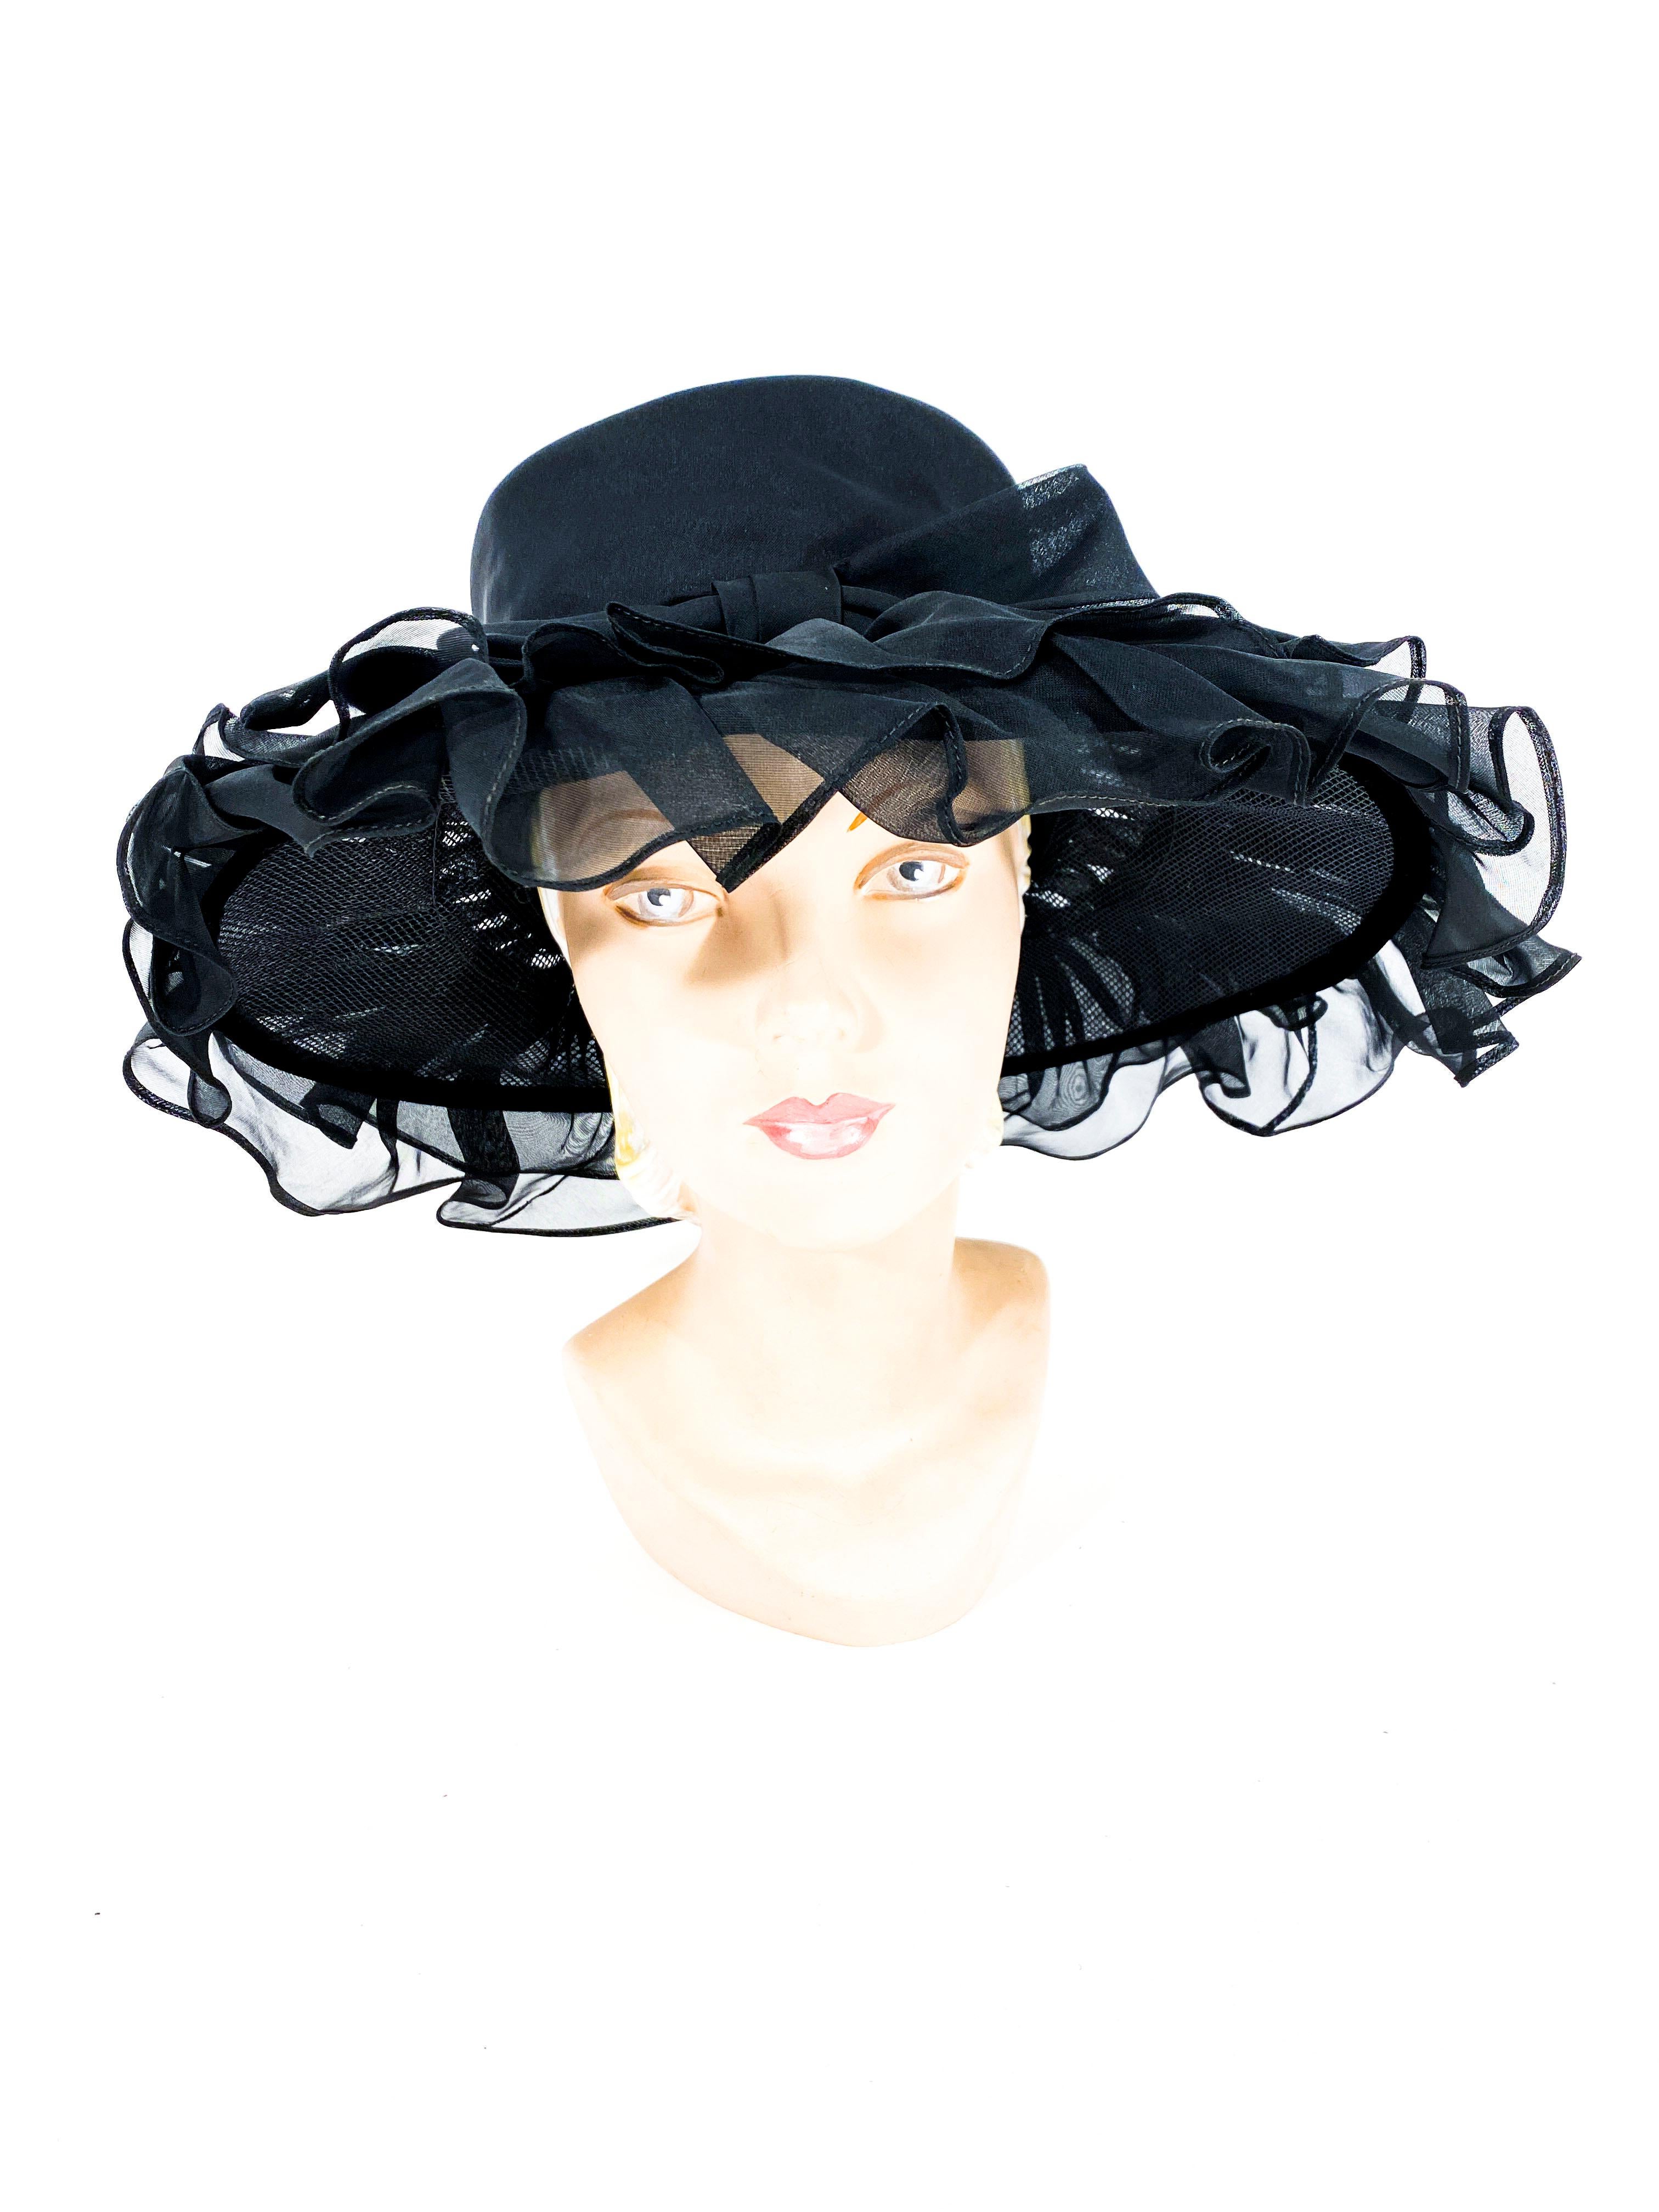 Late 1960s to early 1970s black wide brimmed hat decorated with a double row of organza ruffles, a tall crown, and an oversized bow centered on the band.